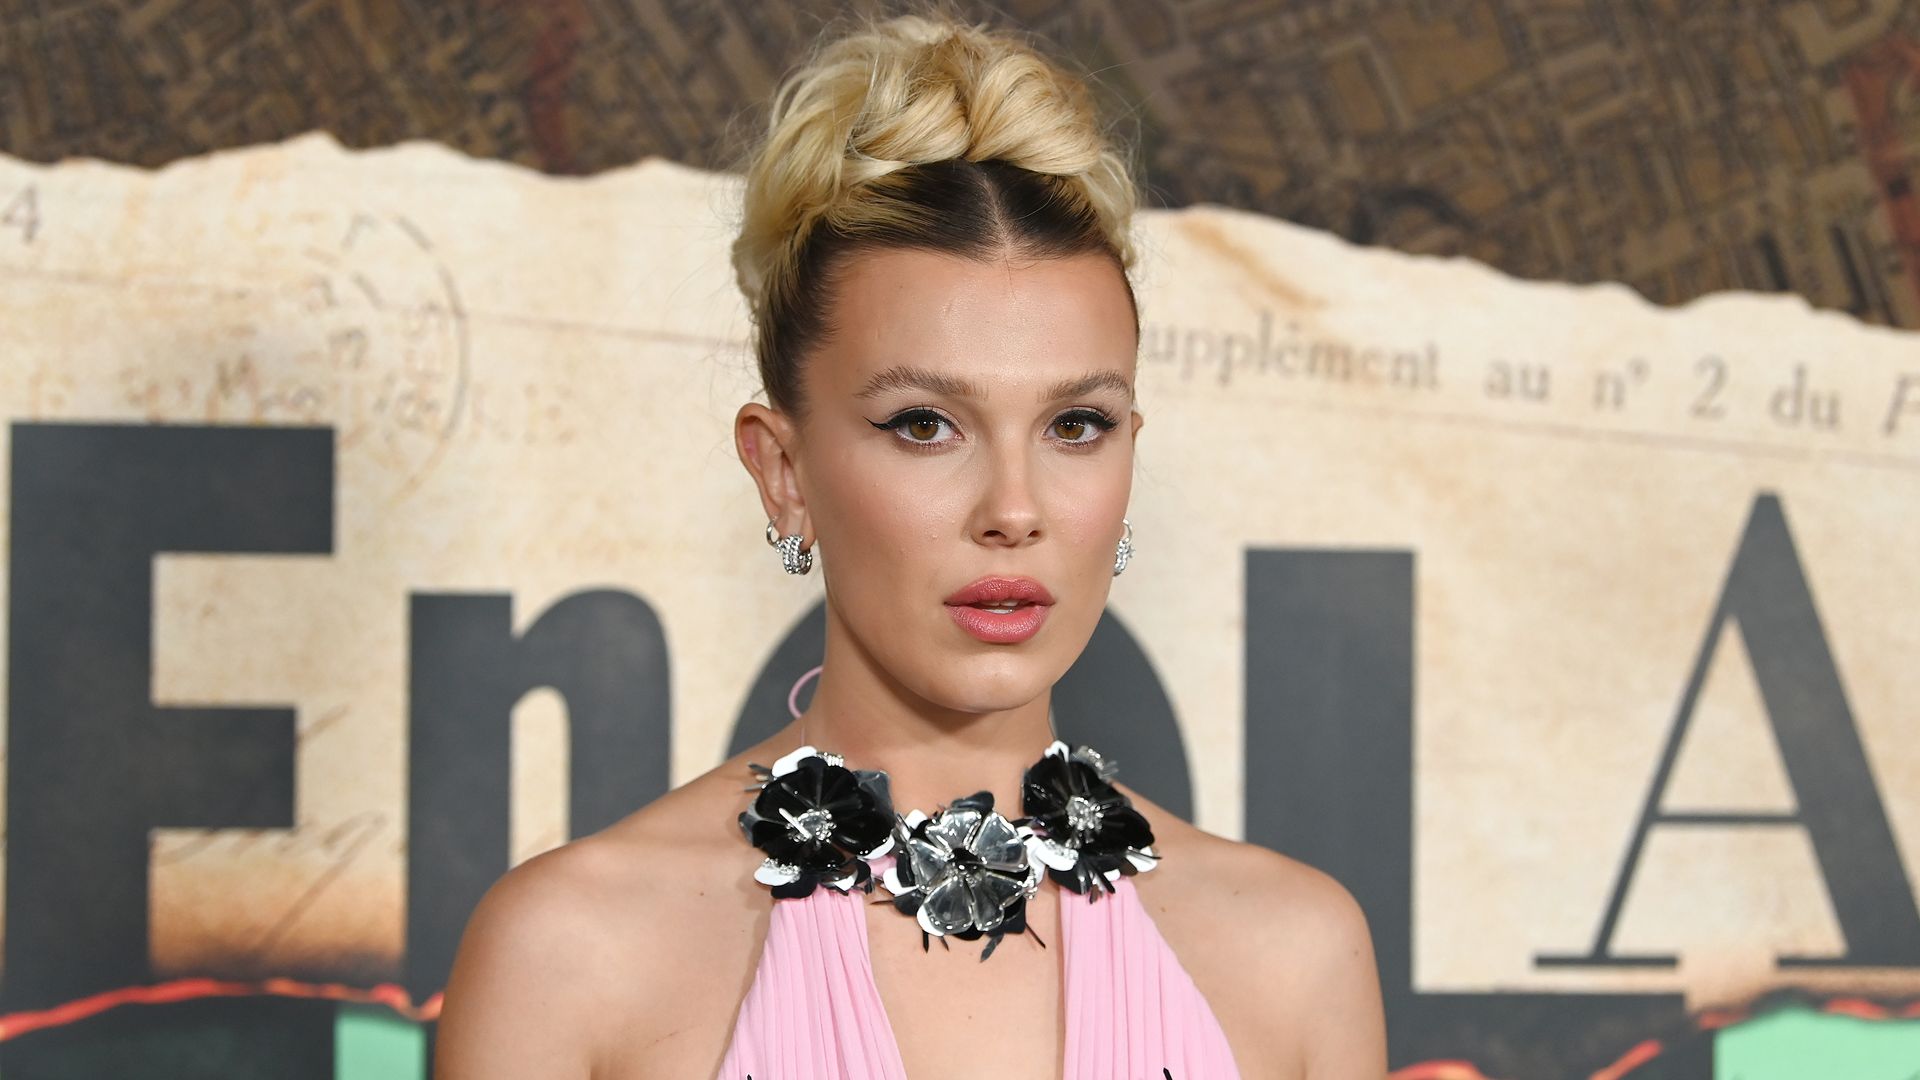 Millie Bobby Brown at the world premiere of Enola Holmes 2 held at the Paris Theater on October 27, 2022 in New York City. 